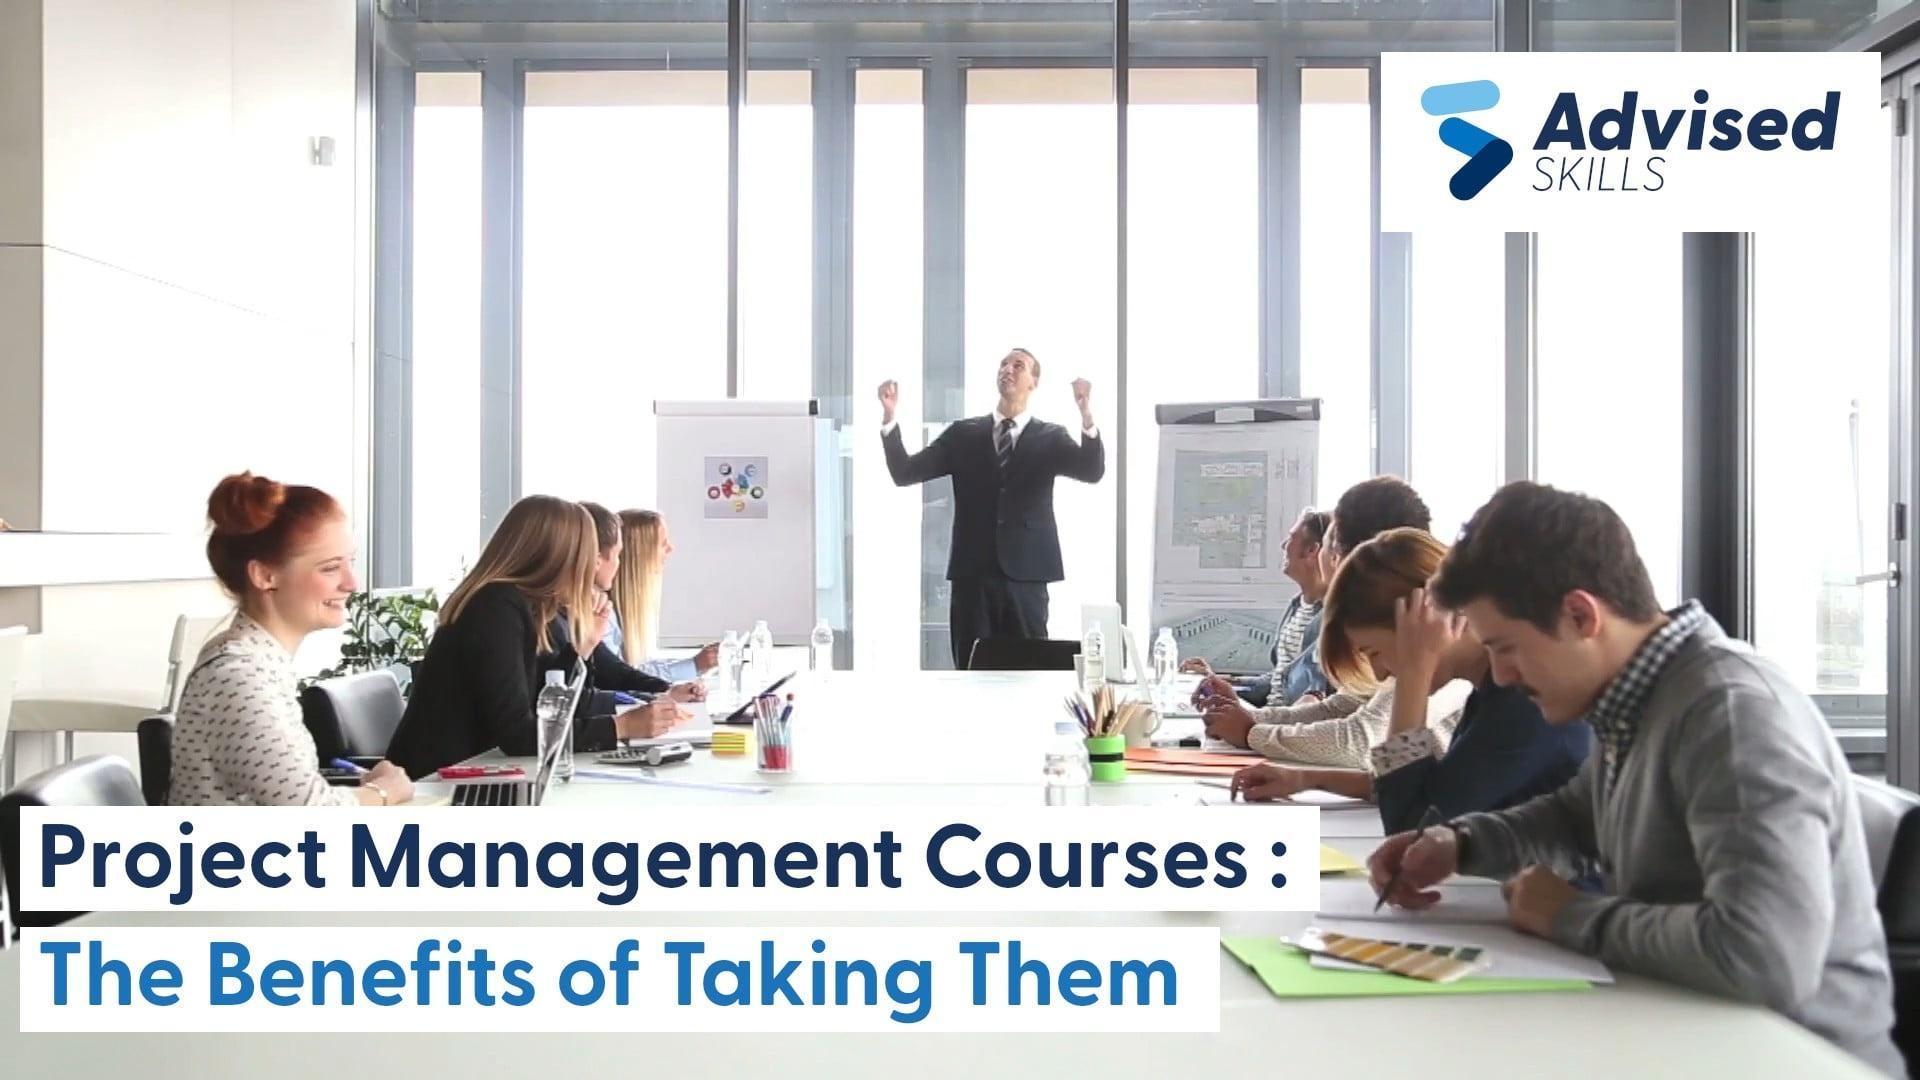 Project Management Courses: The Benefits of Taking Them